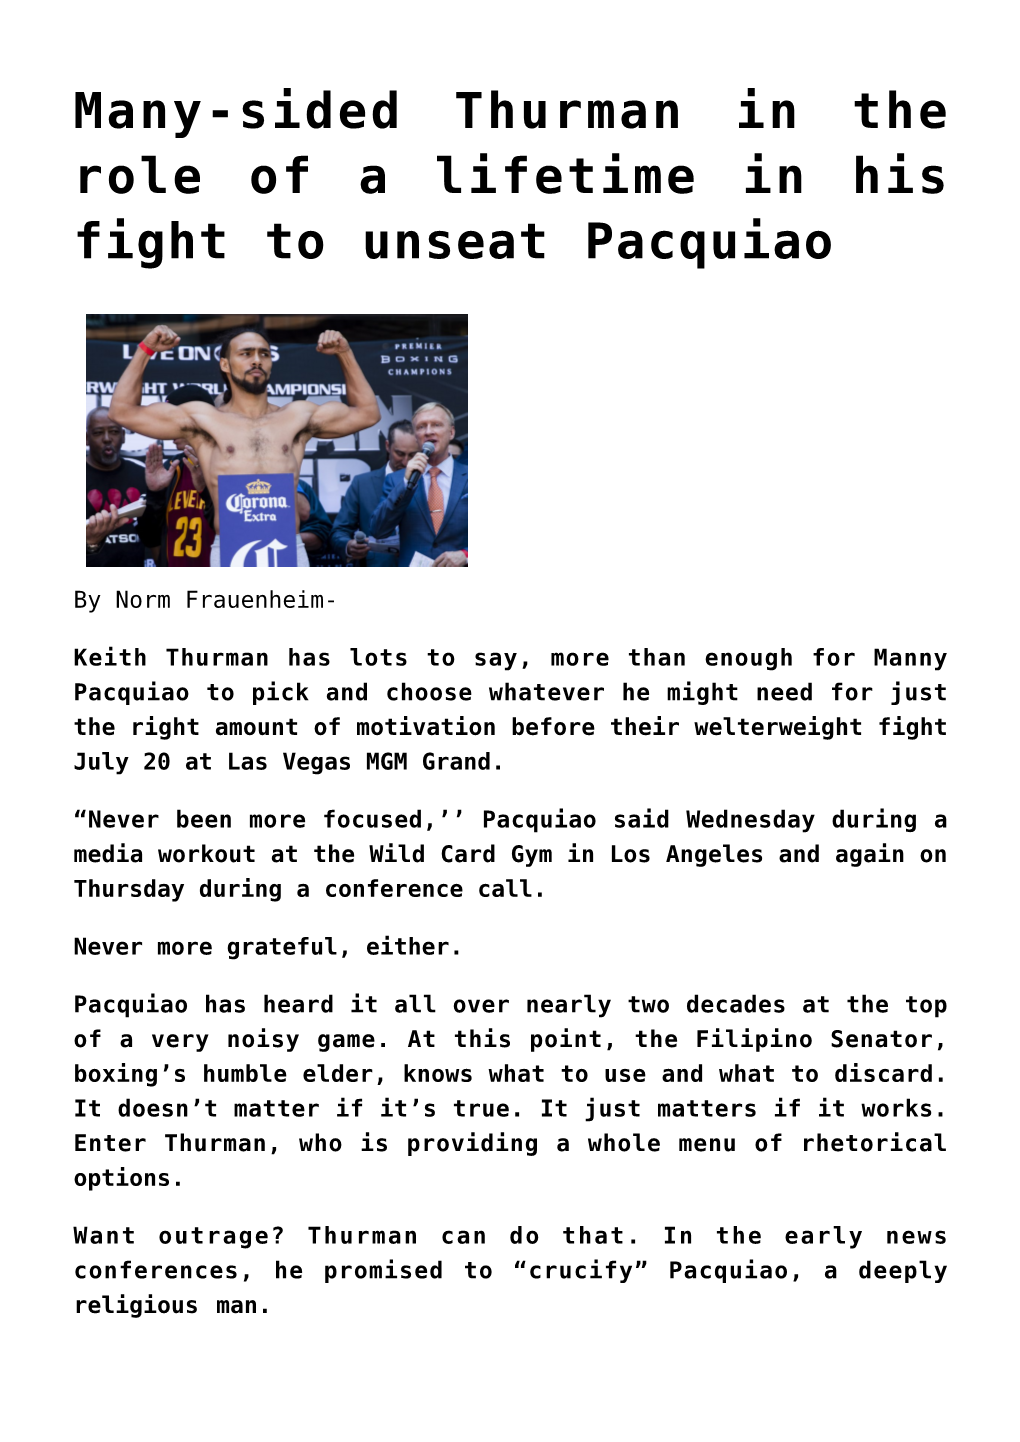 Many-Sided Thurman in the Role of a Lifetime in His Fight to Unseat Pacquiao